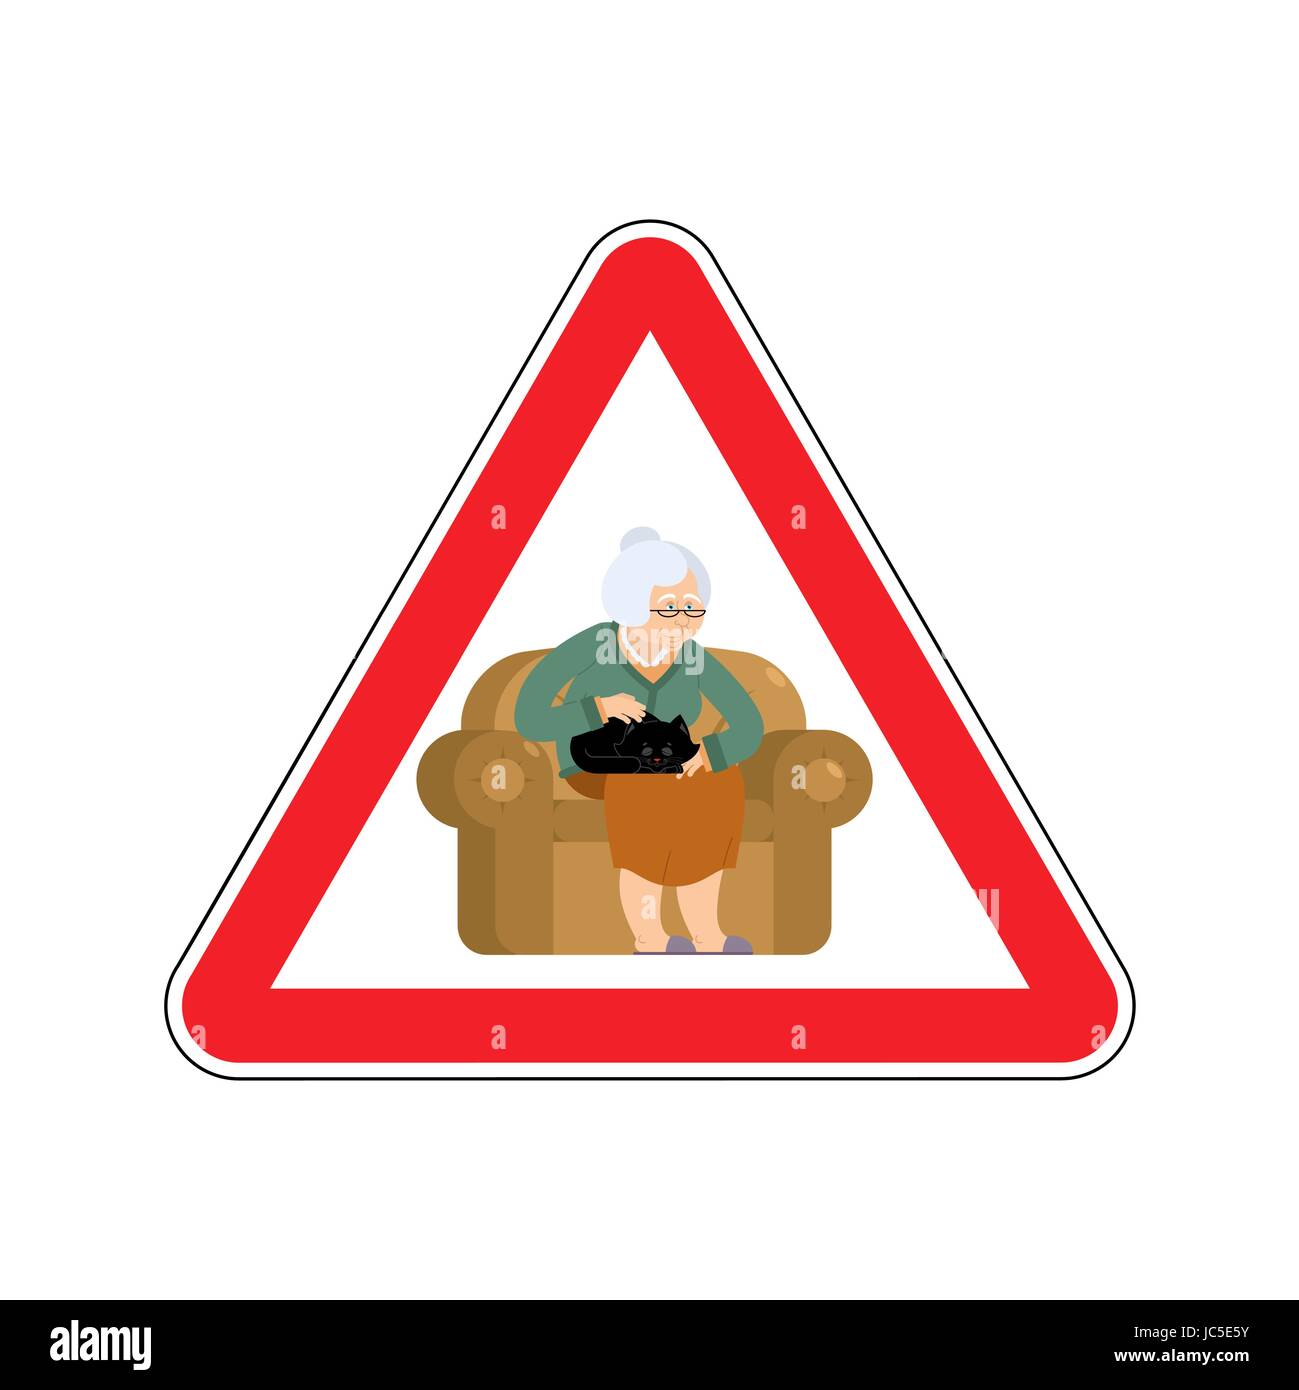 Attention grandmother. Caution old woman and cat. Red triangle road sign Stock Vector